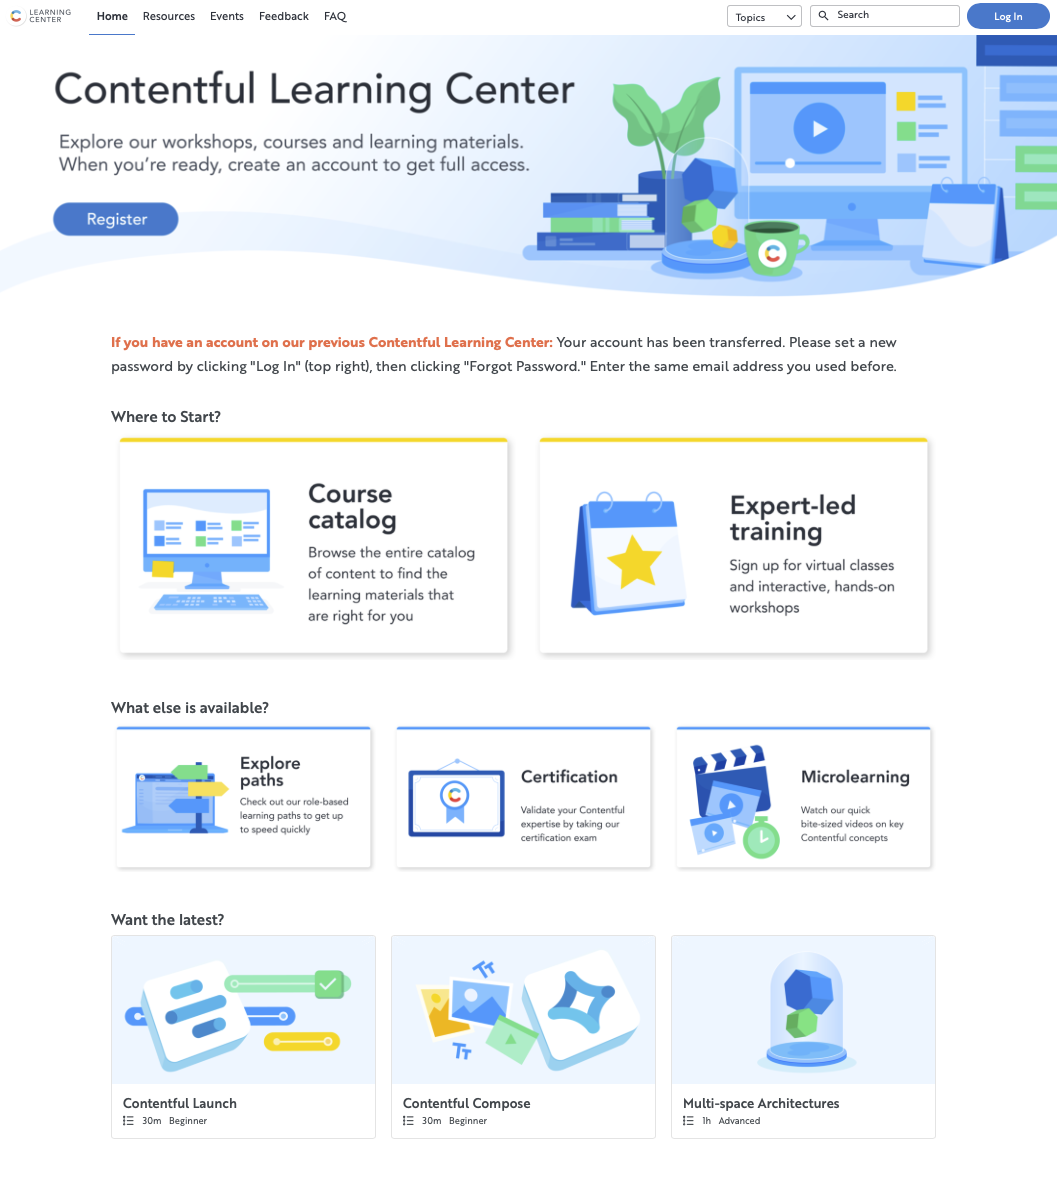 Screenshot of the Contentful Learning Center page